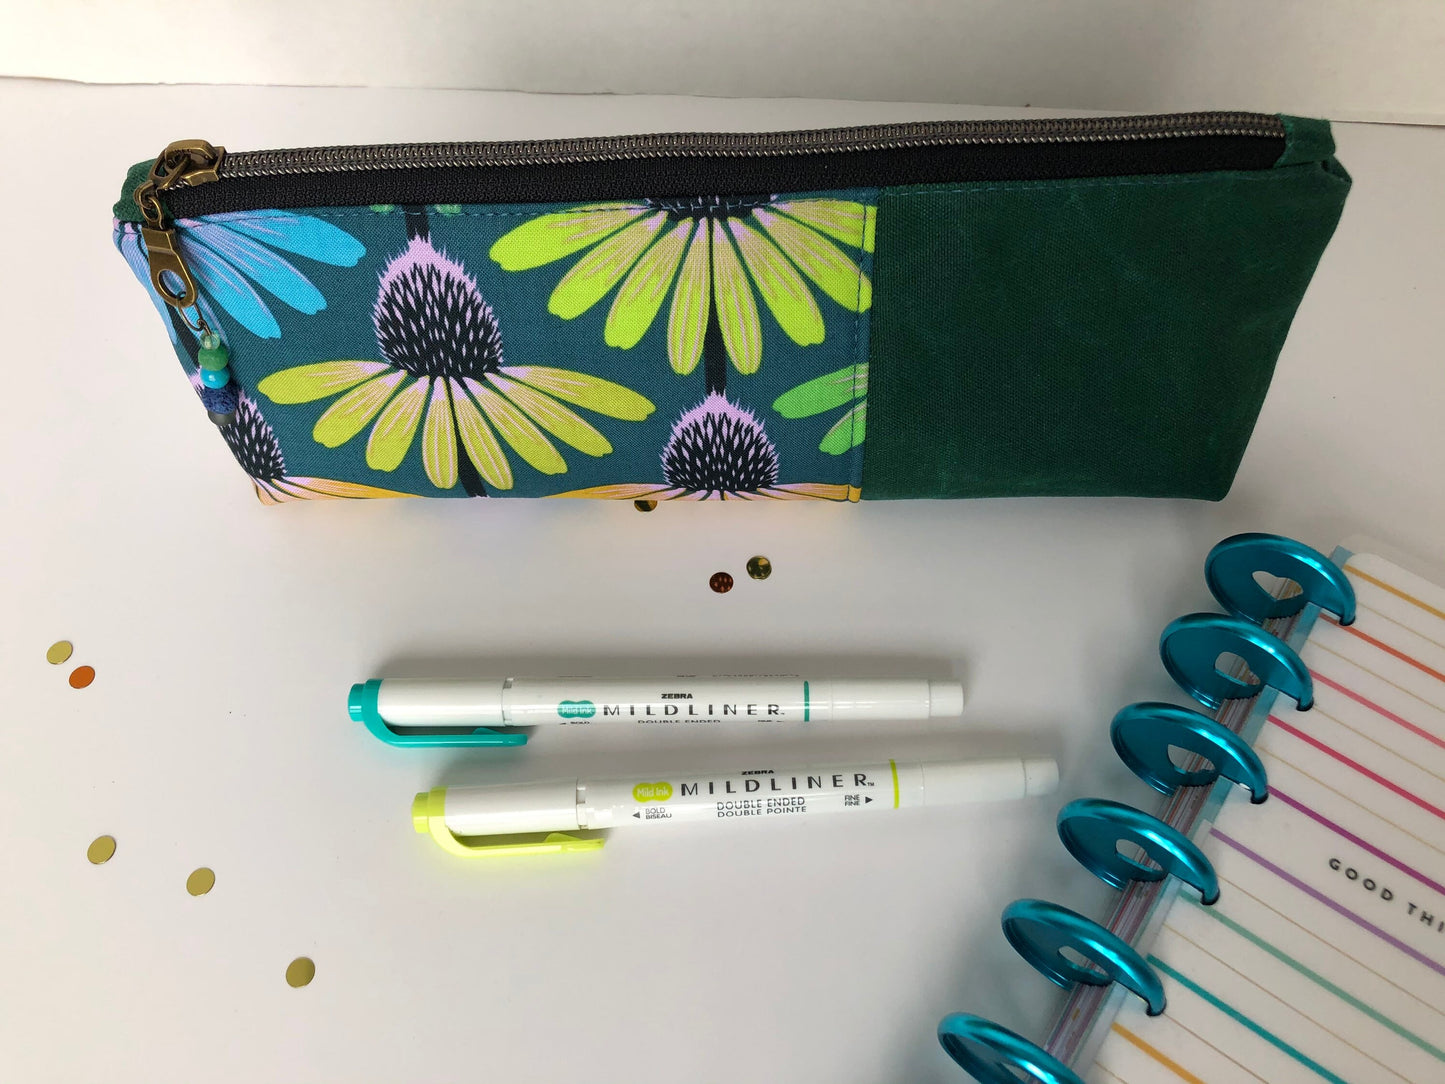 Echinacea Flowers and Waxed Canvas Pencil Pouch, Planner Pouch